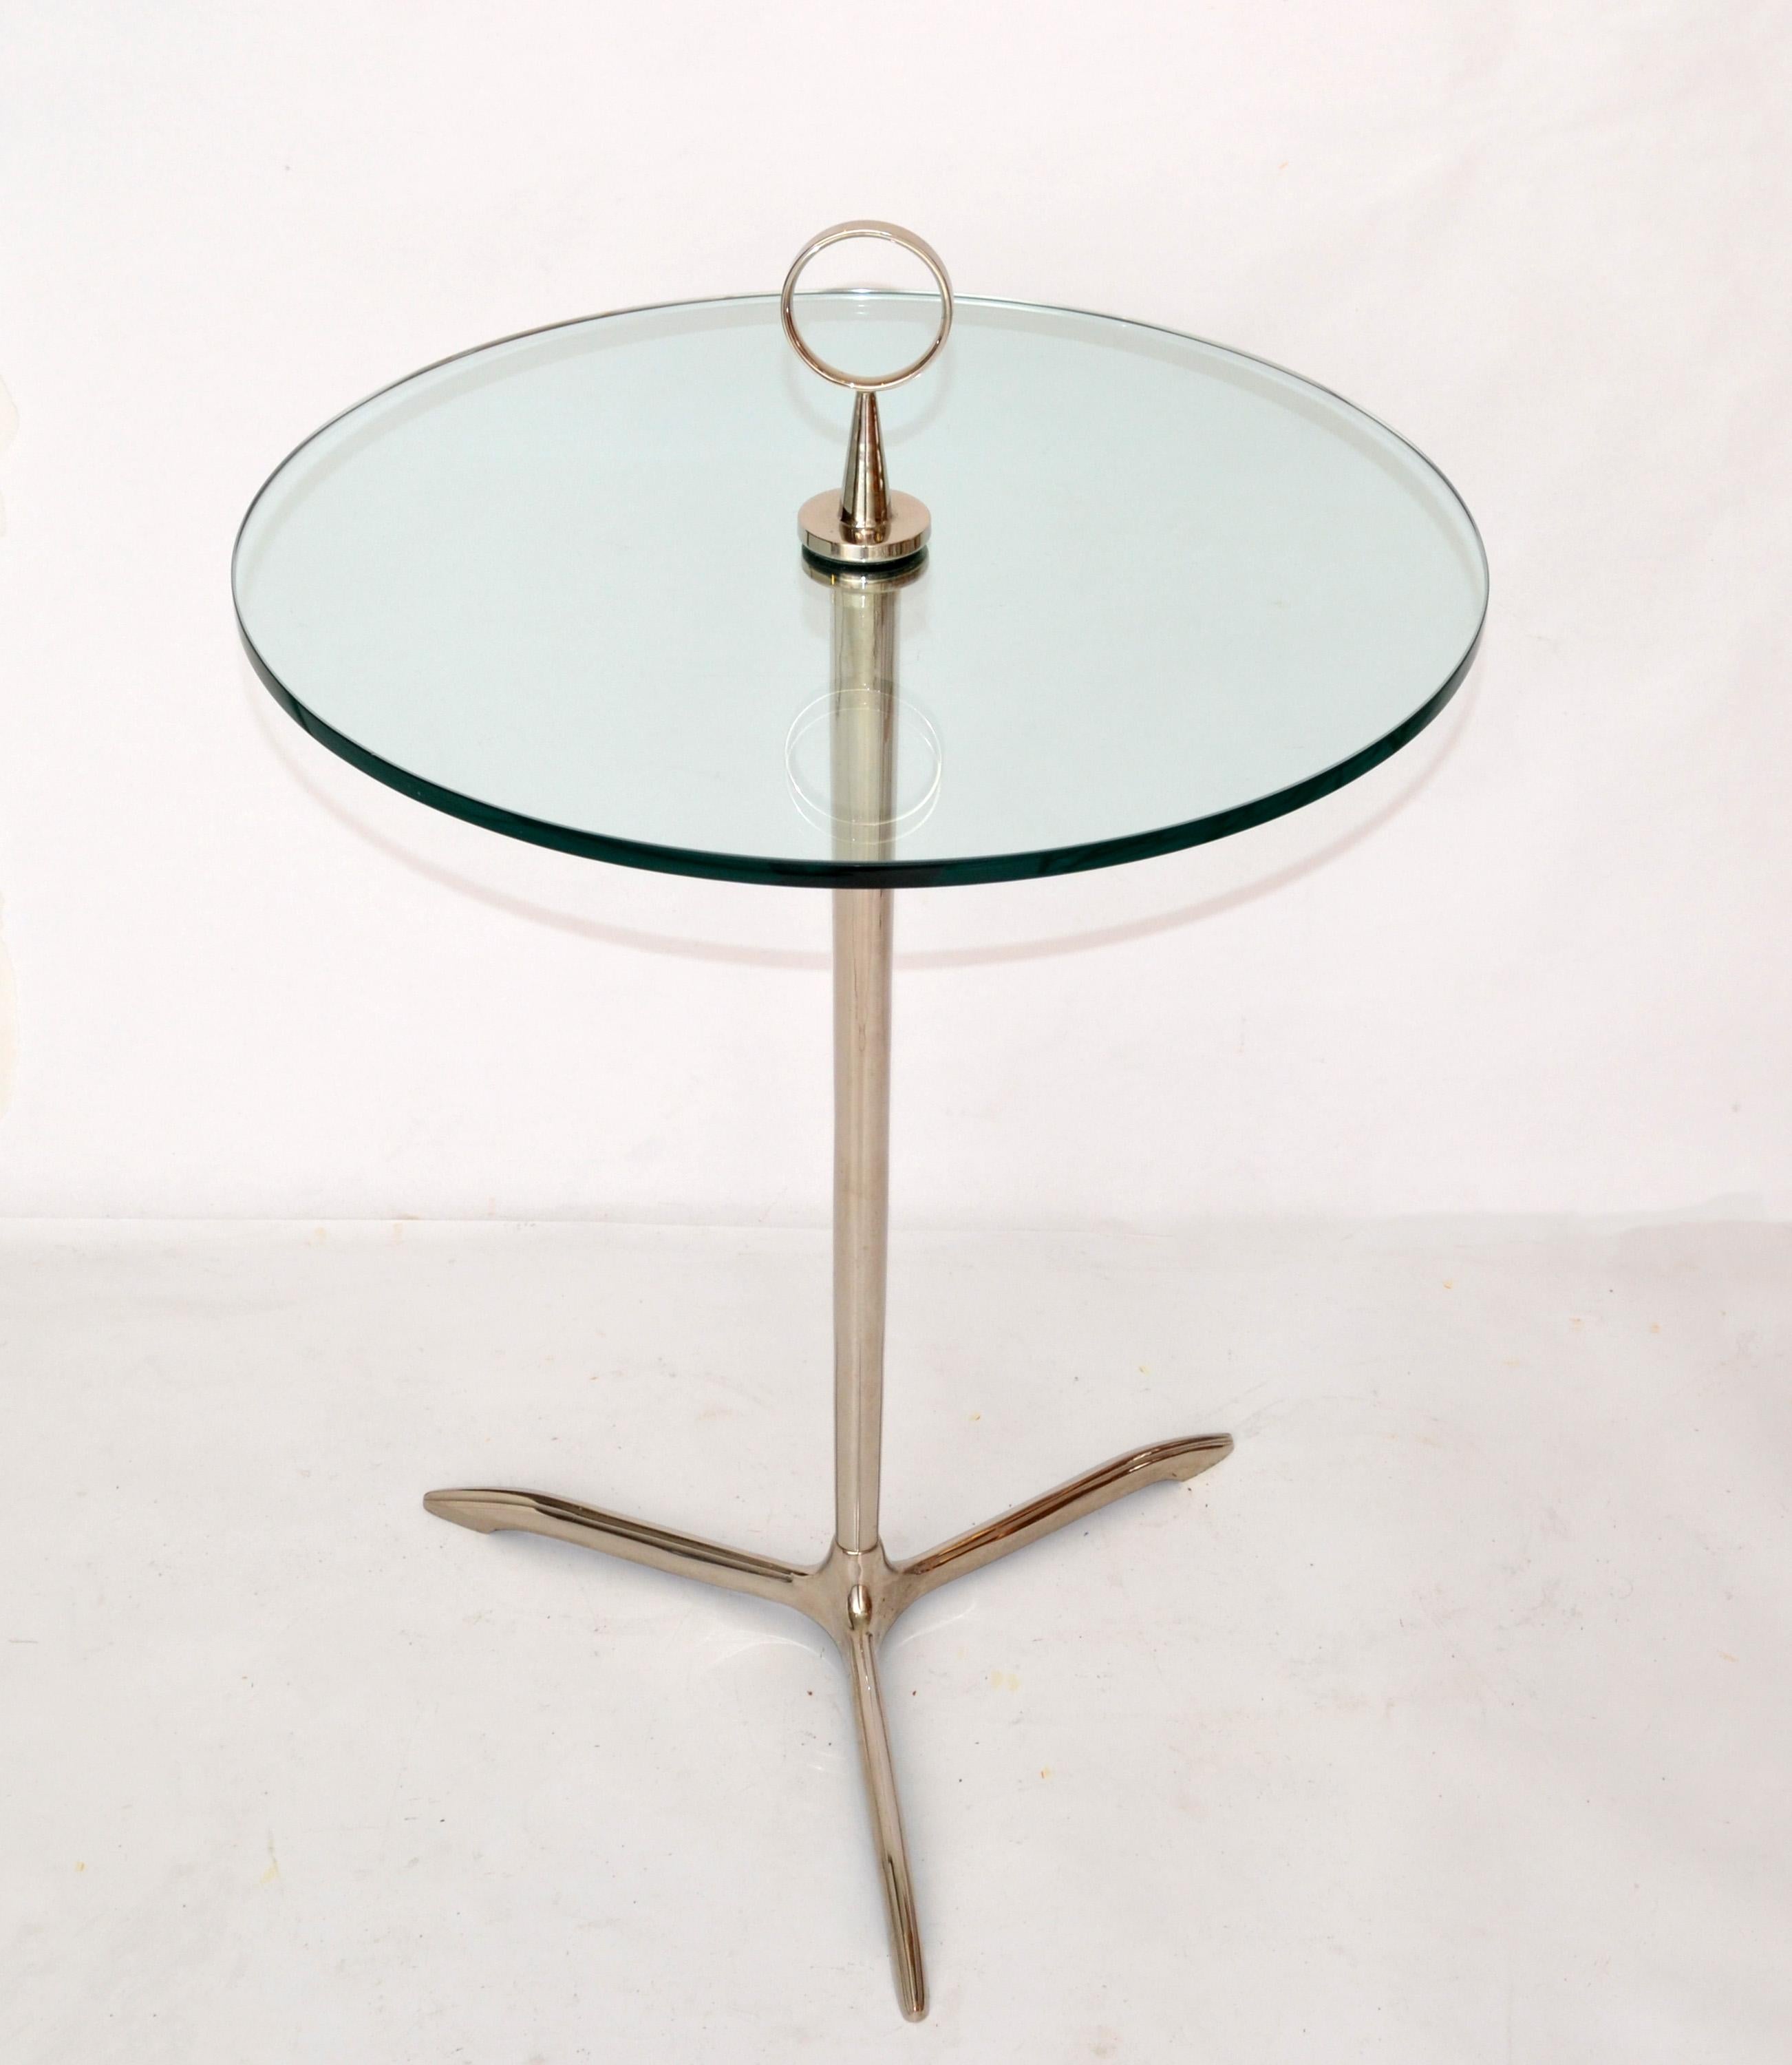 Italian Cesare Lacca Style Stainless Steel & Round Glass Tripod Side Table, Italy, 1950 For Sale